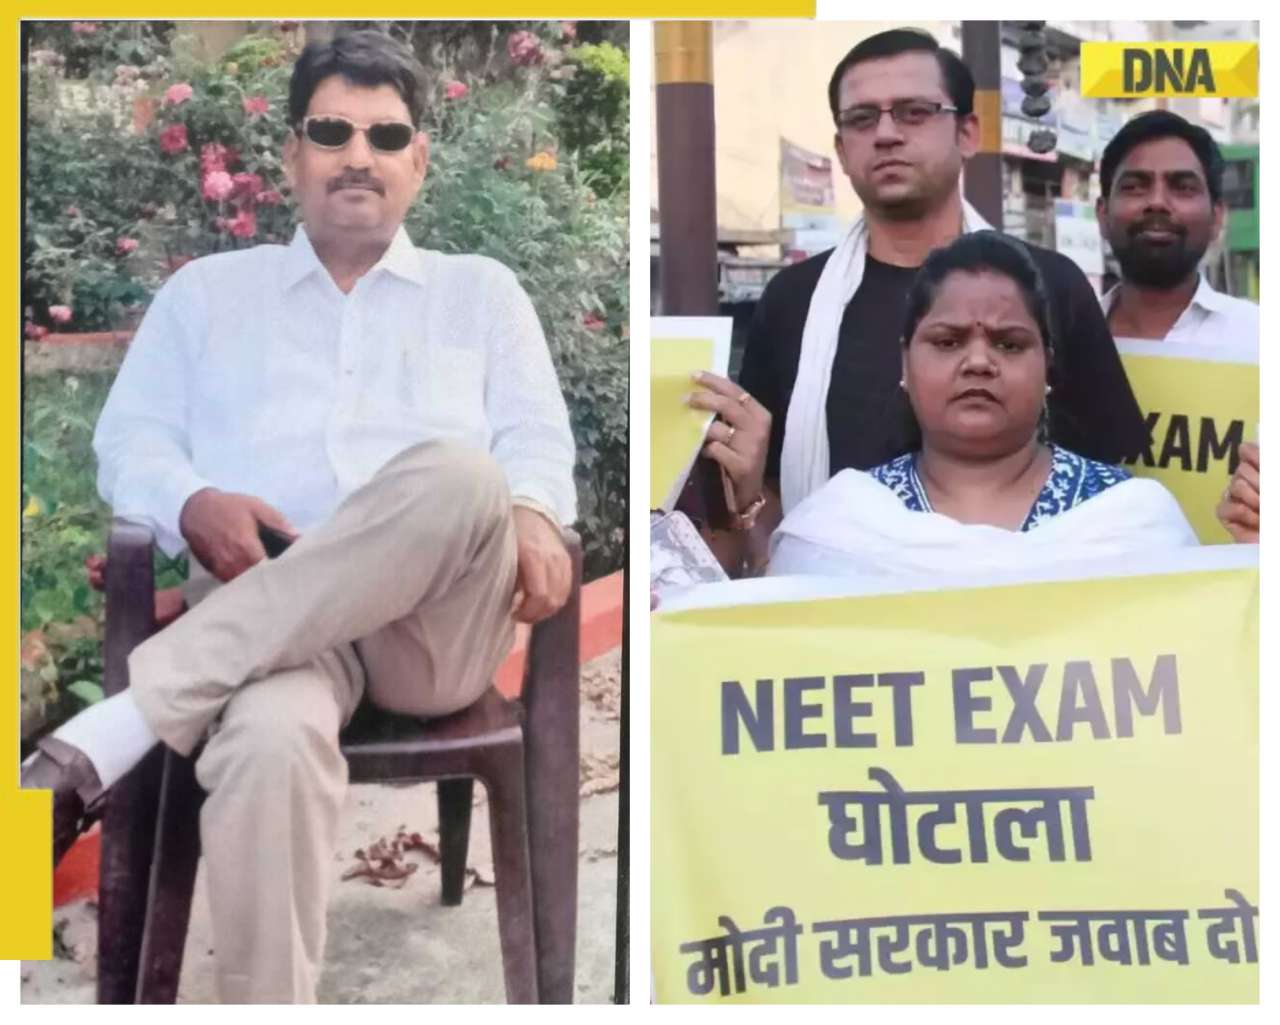 Who is Sikandar Yadvendu, the alleged mastermind of NEET scam, he is from...